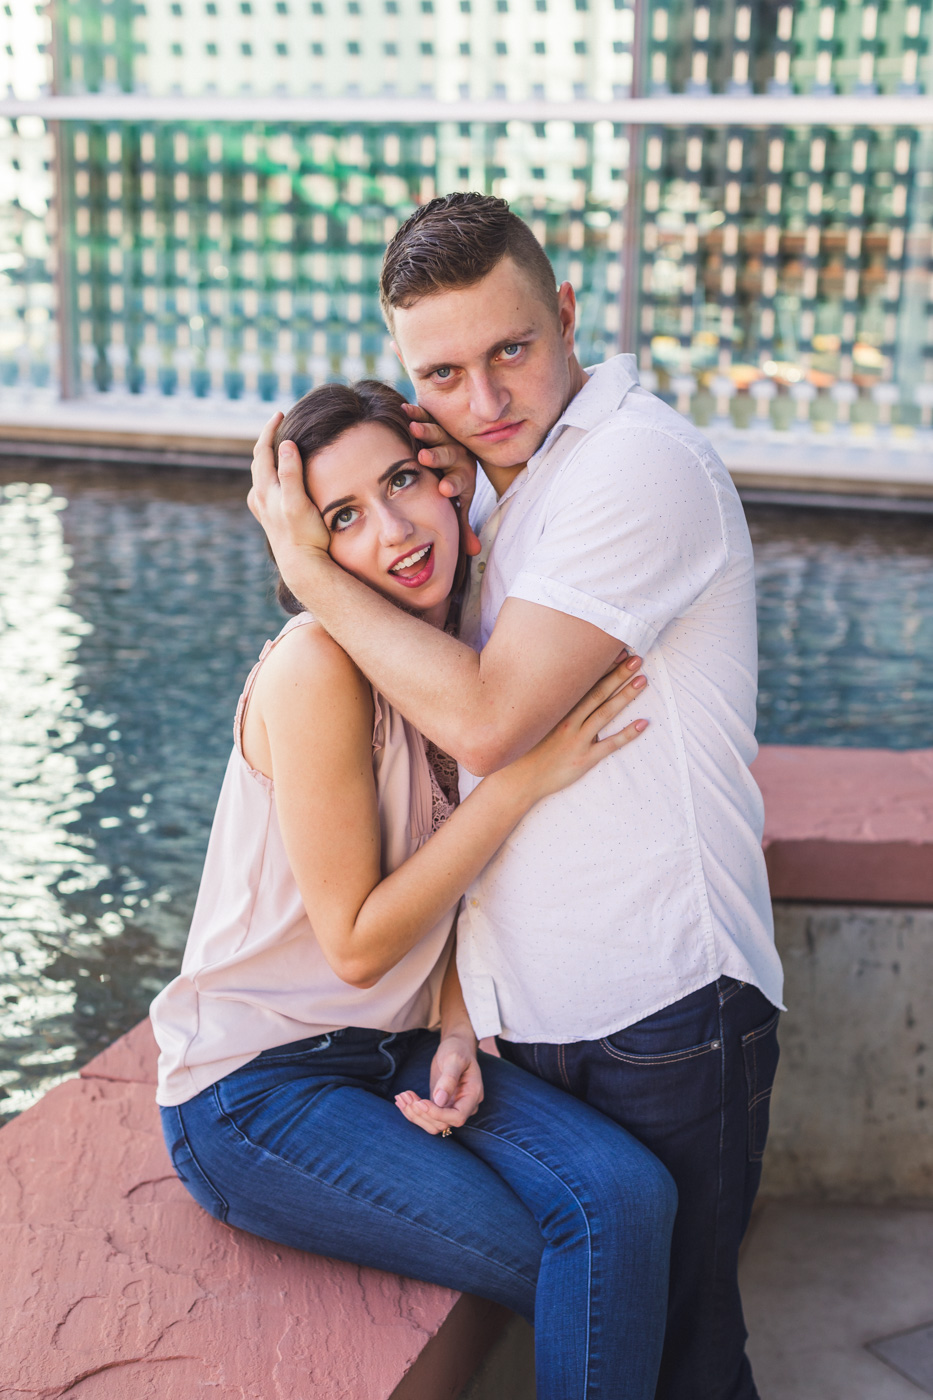 hilarious-silly-engagement-photo